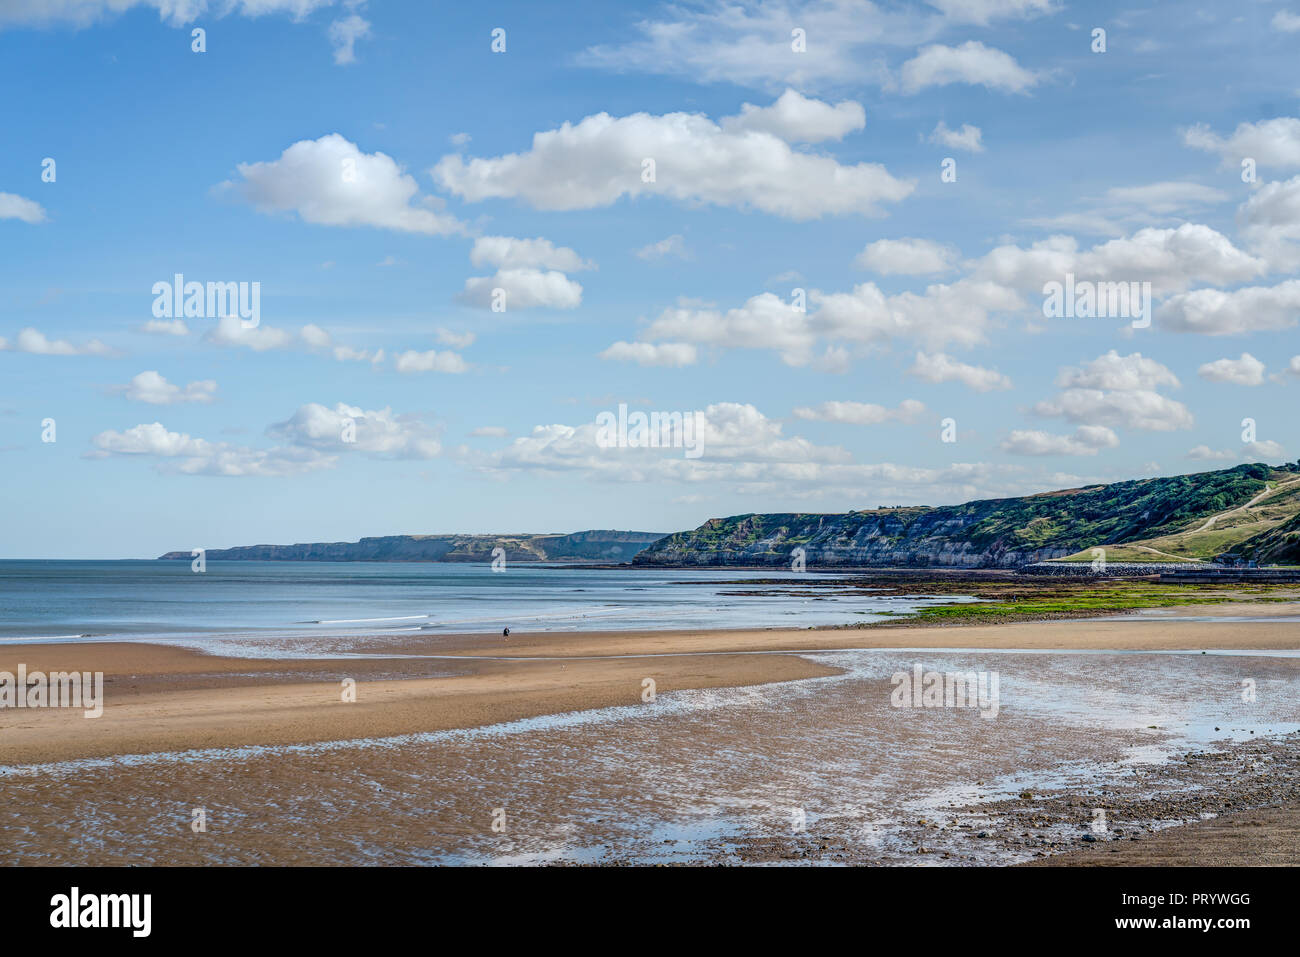 Down the south end of the sandy beach at Scarborough holiday resort looking down the rocky cliffs to Filey Brigg in the distance. Beautiful sunny day Stock Photo